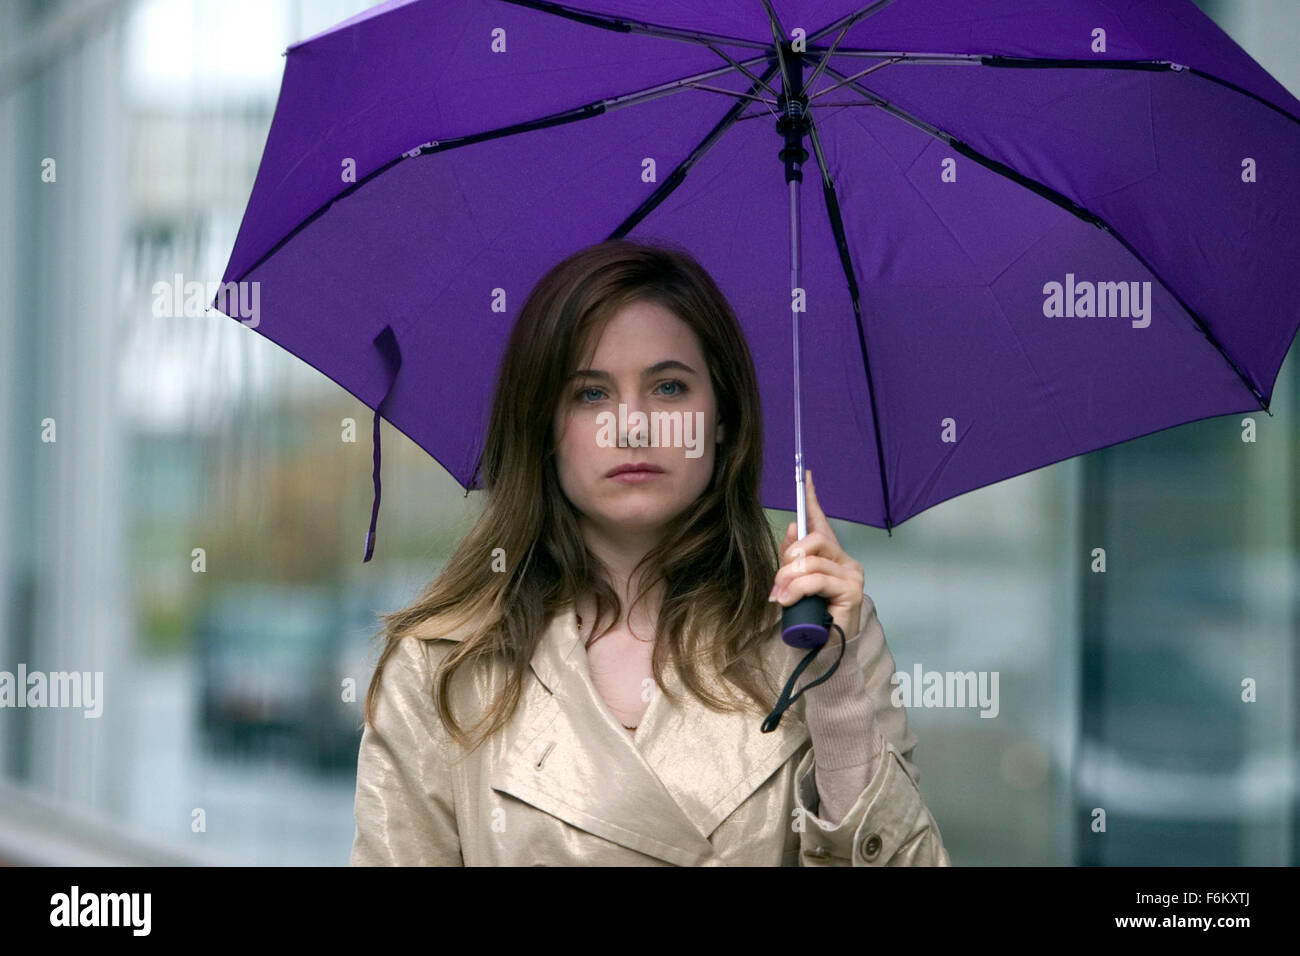 RELEASE DATE: Aug 28, 2007. MOVIE TITLE: Surviving My Mother (aka The Yellow Woman). STUDIO: Cinemaginaire Inc. PICTURED: CAROLINE DHAVERNAS as Bianca. Stock Photo